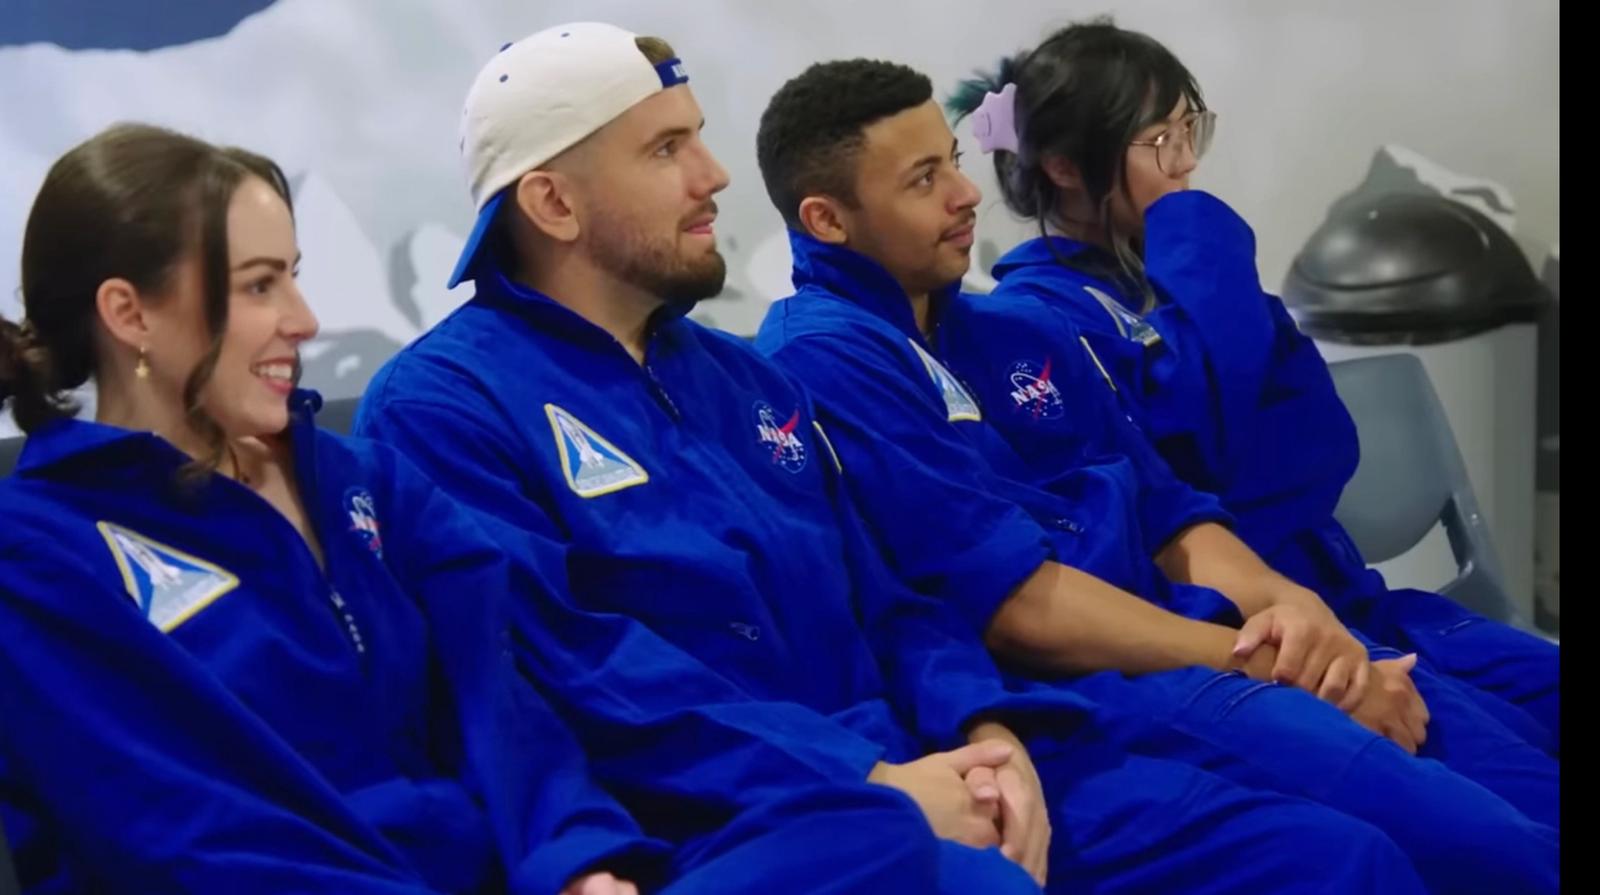 Four content creators in space training gear